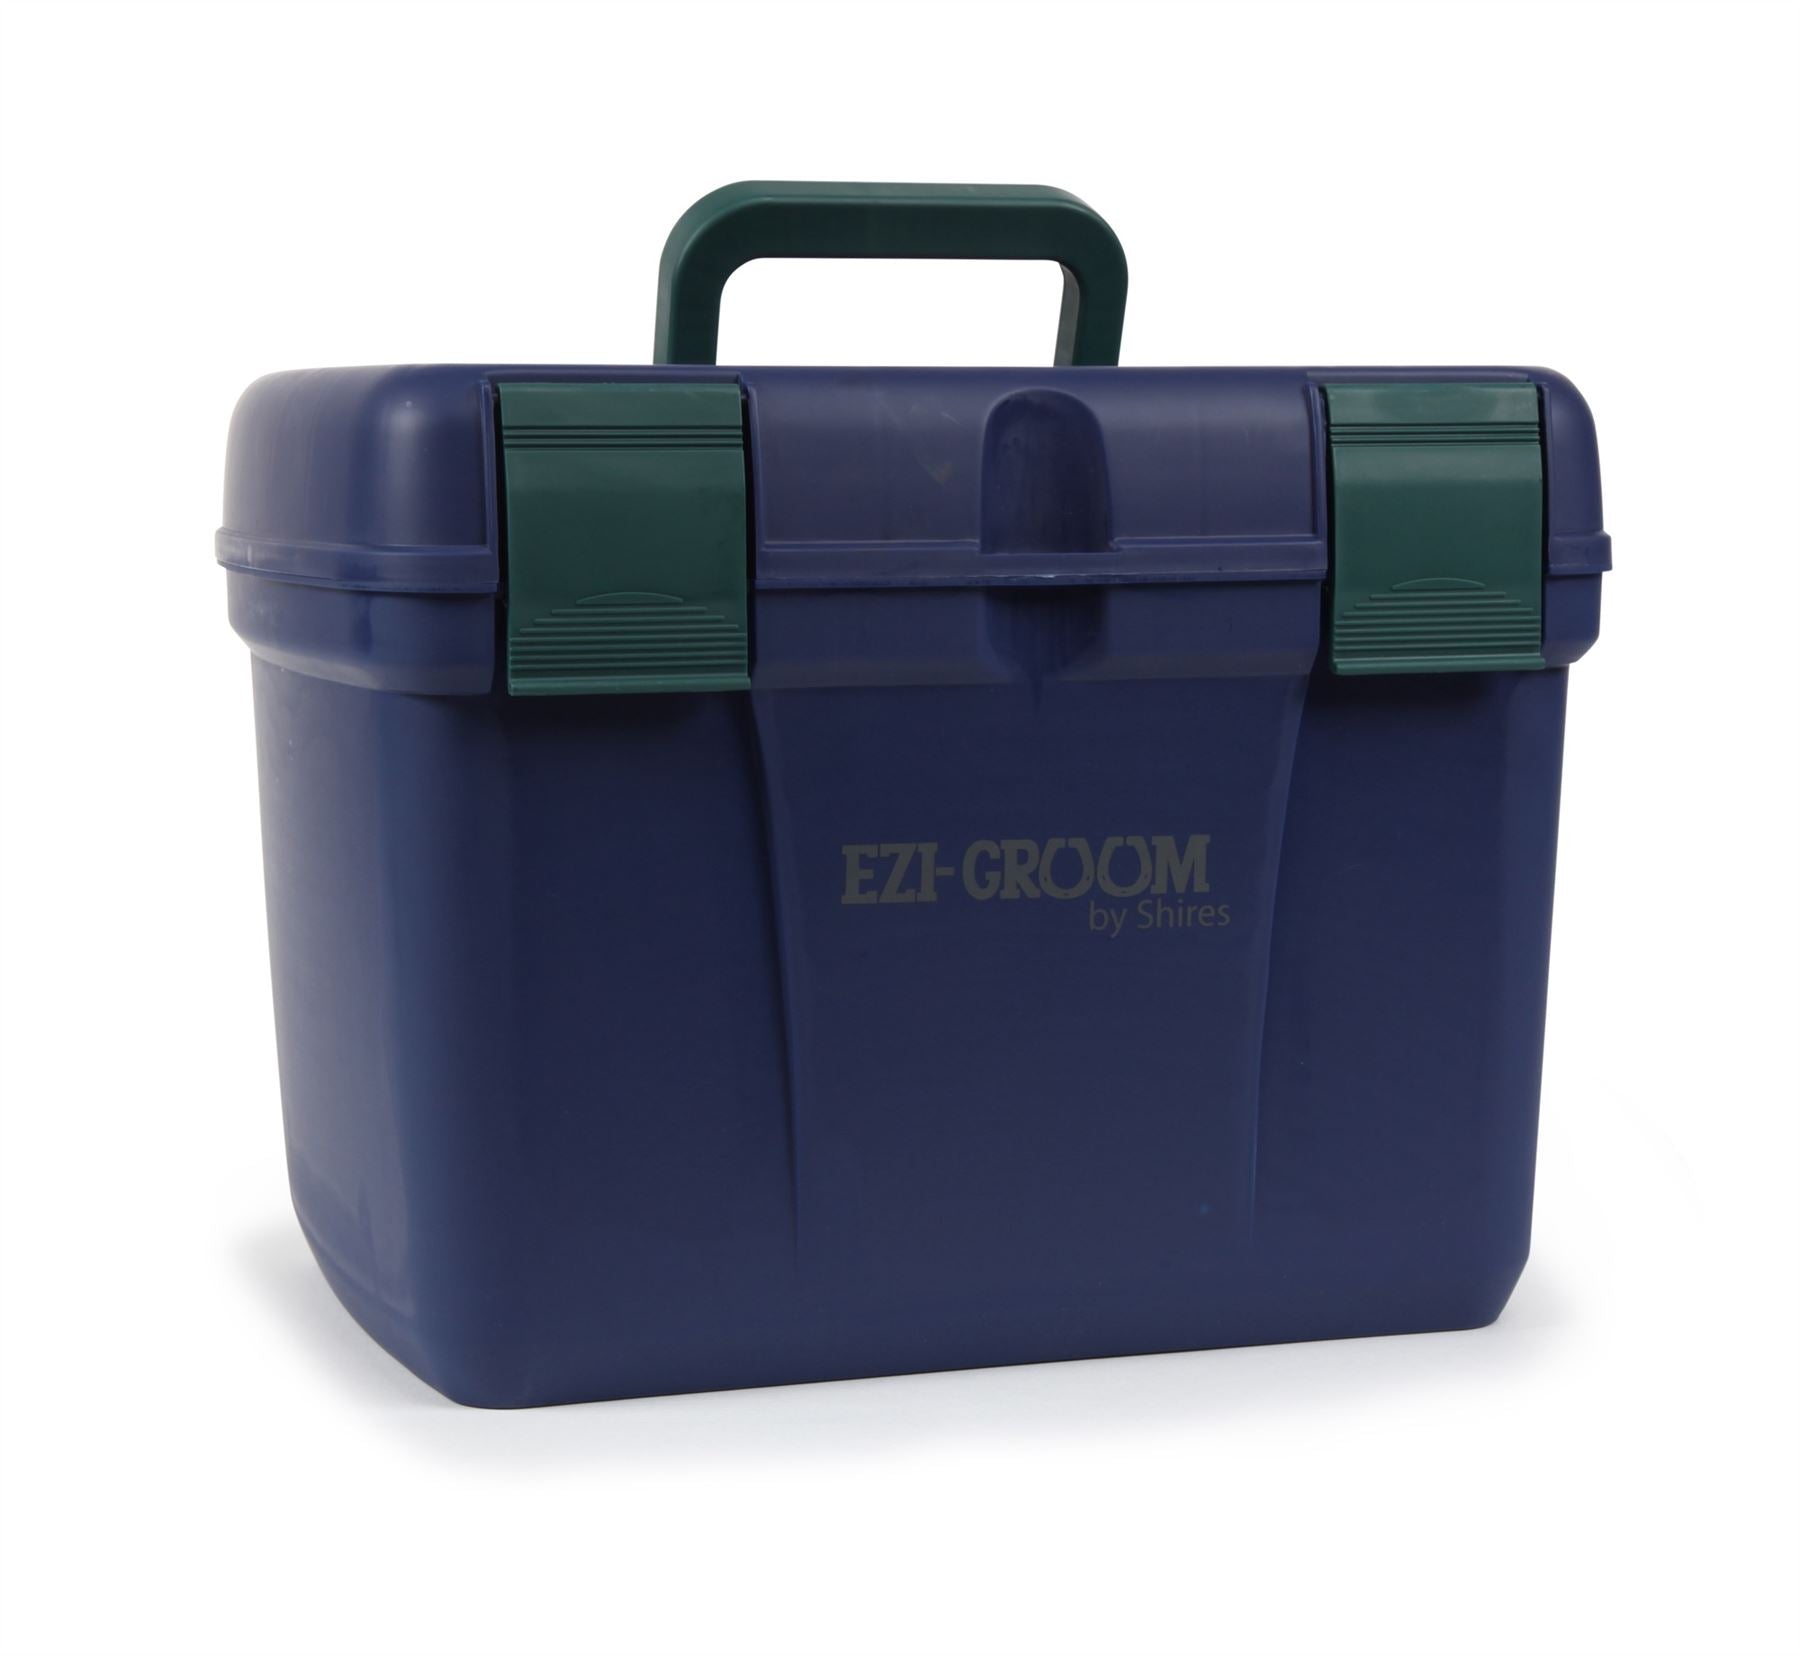 Shires Ezi-Groom Deluxe Grooming Box - Just Horse Riders